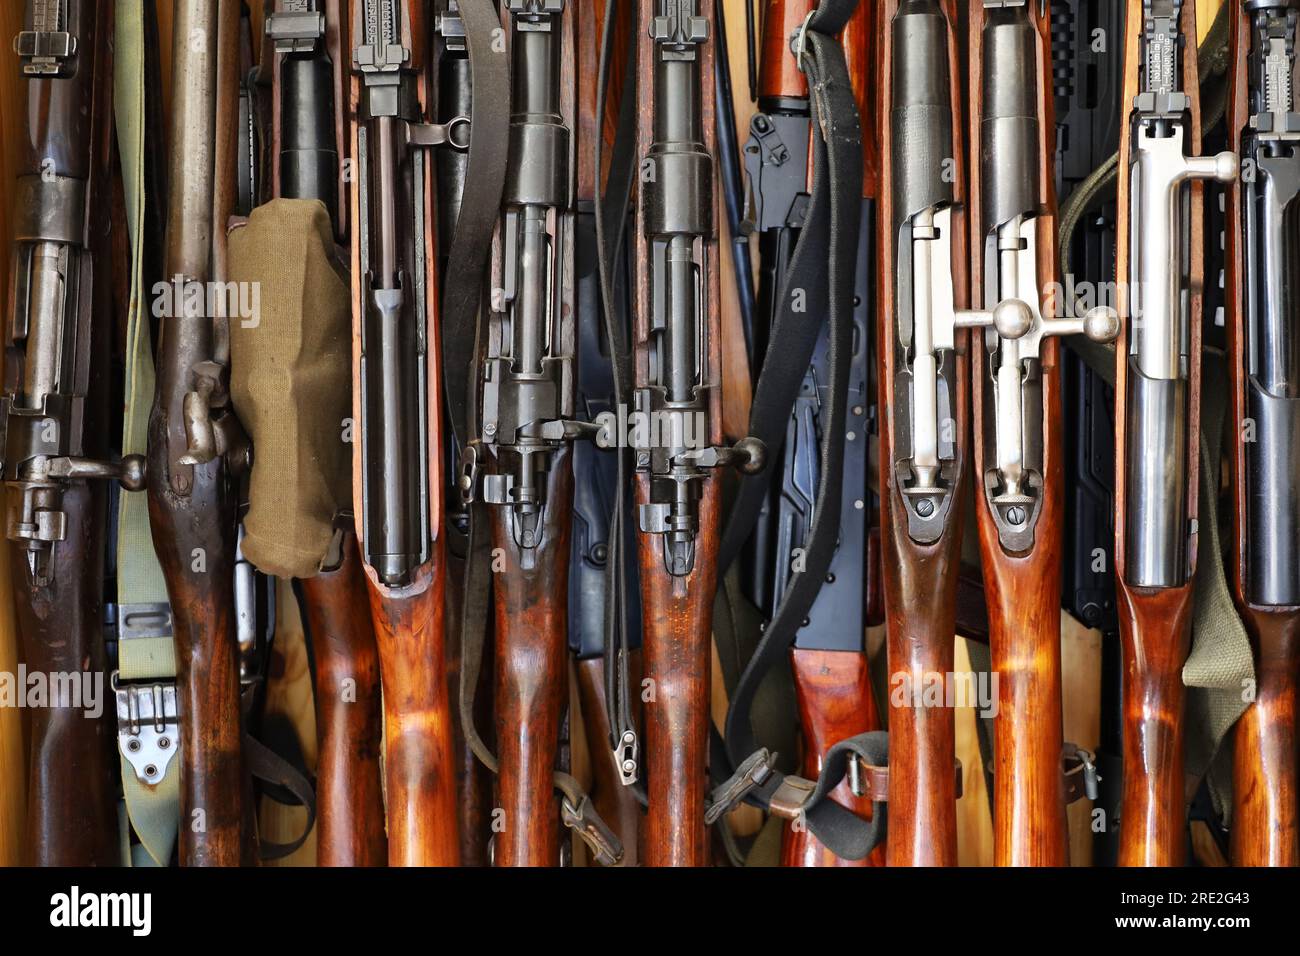 Automatic weapon collection, rifles and machine guns in gun cabinet Stock Photo